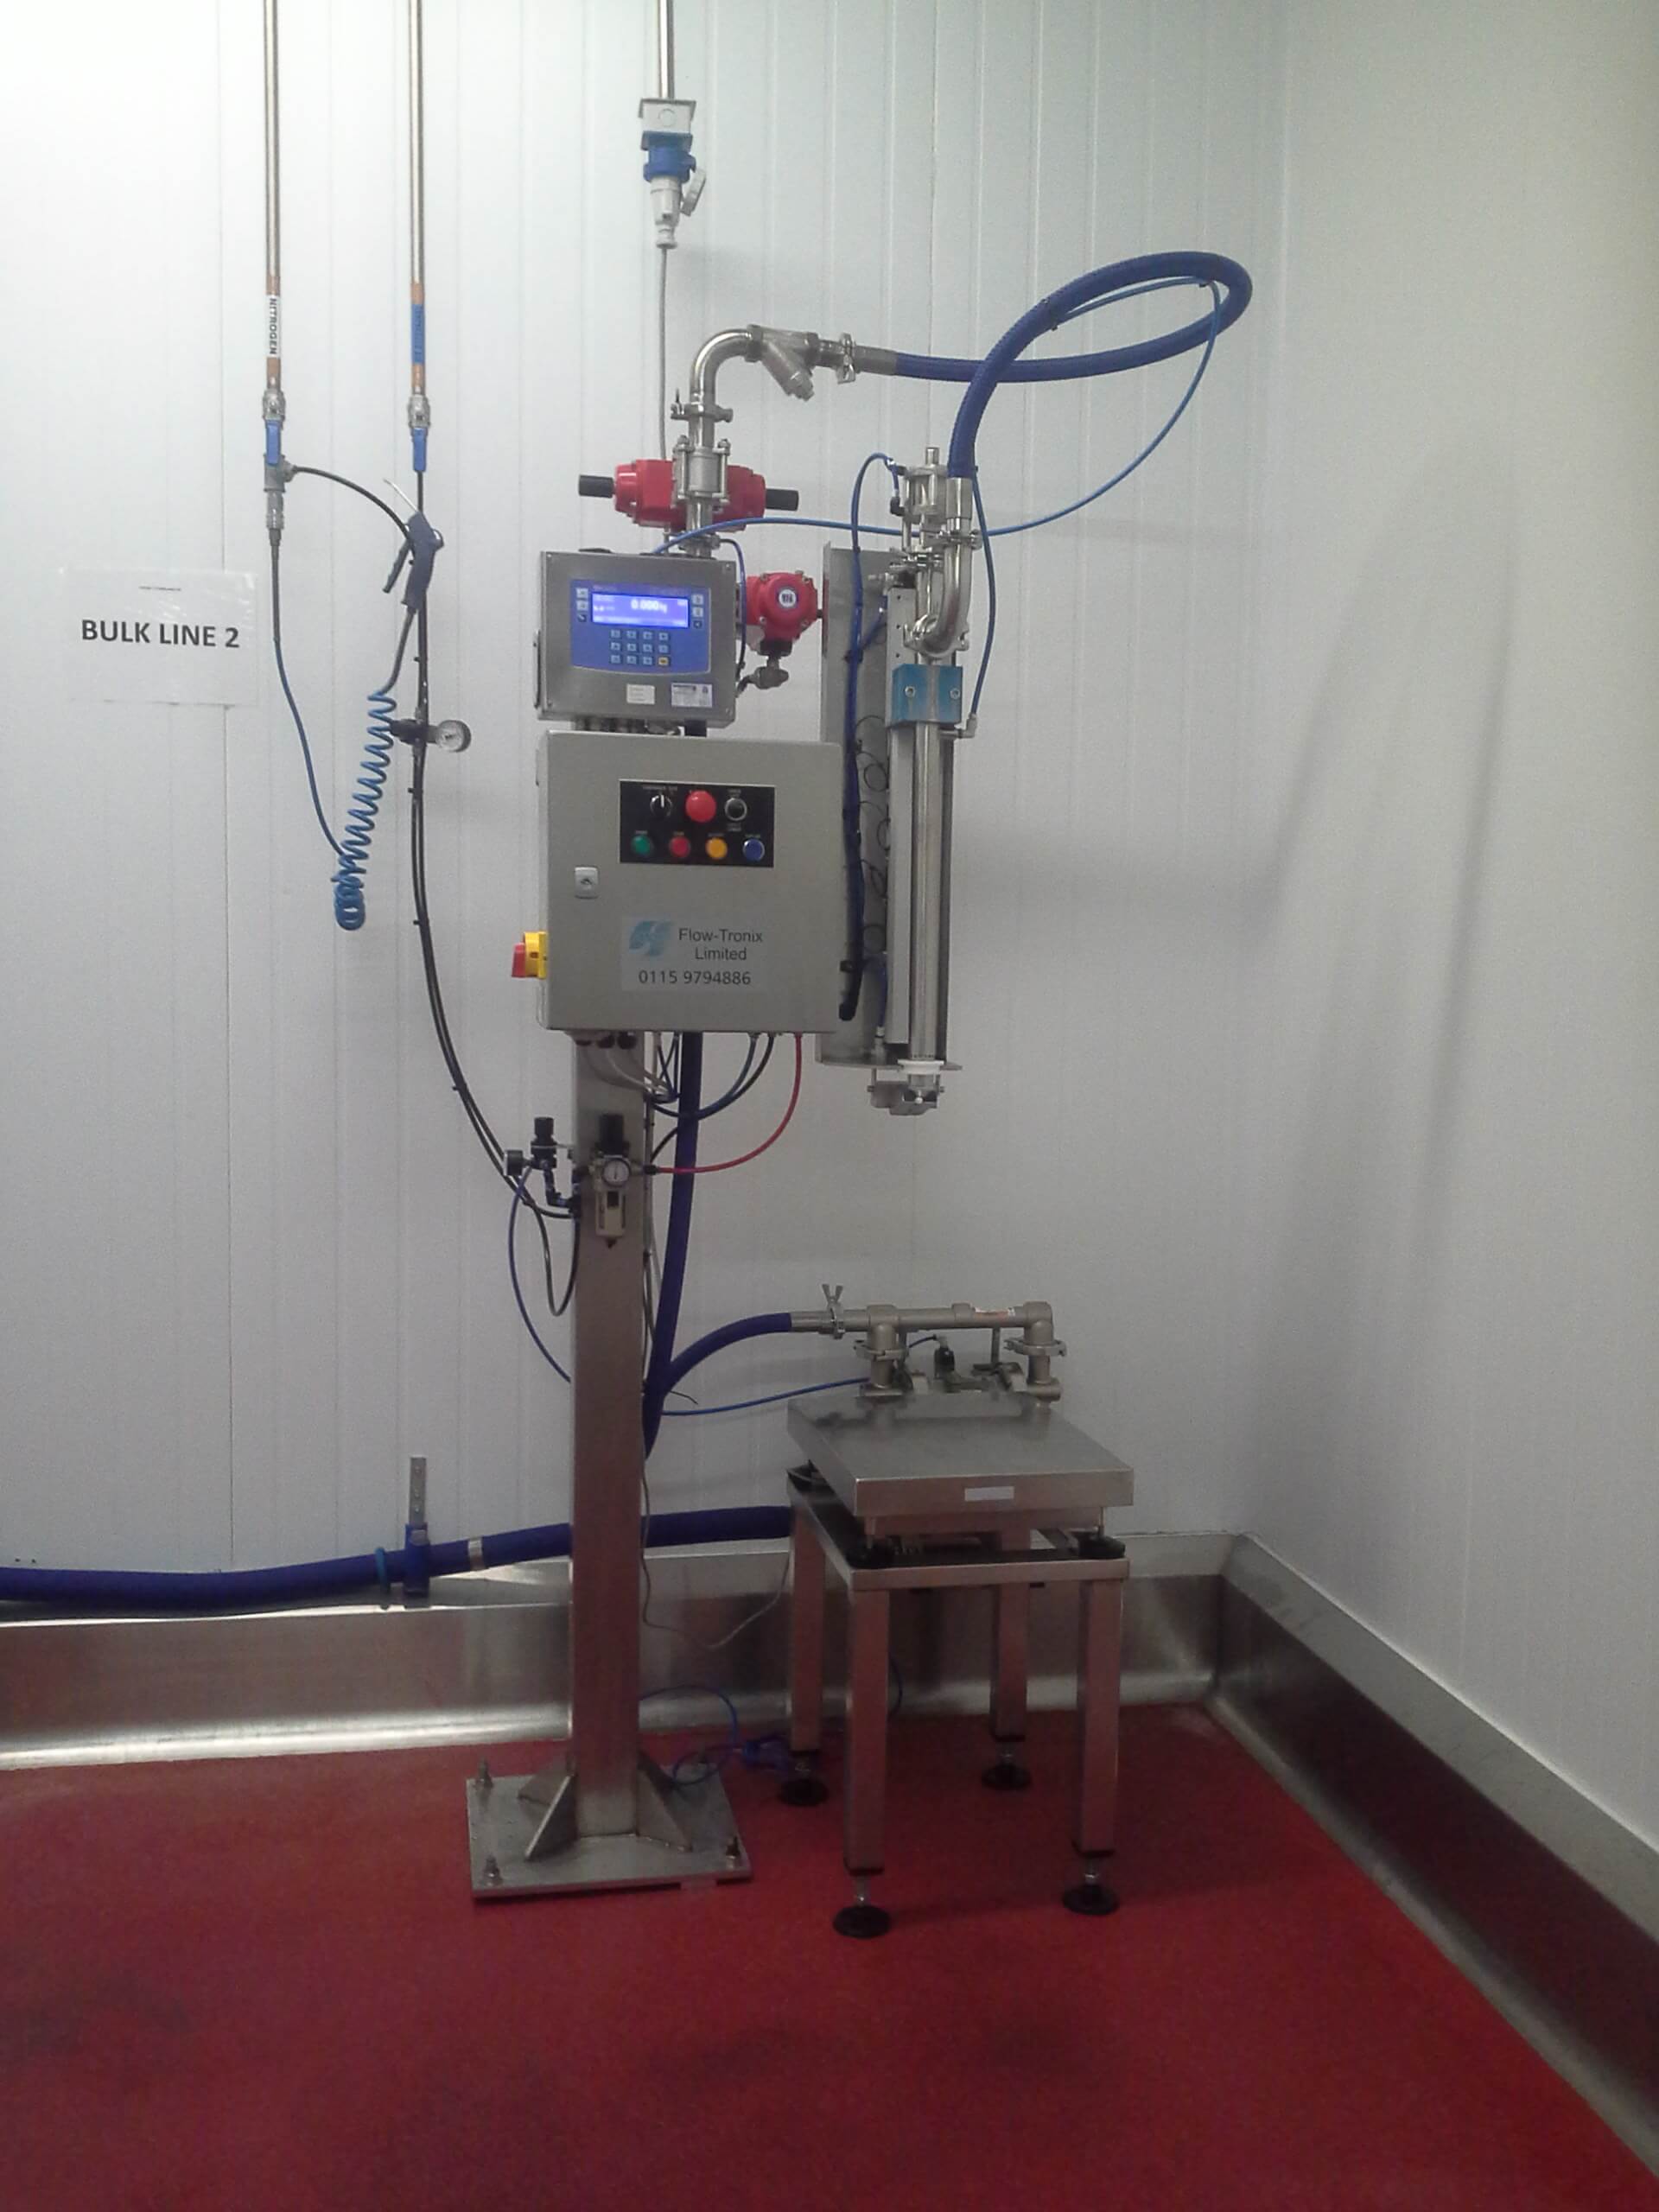 the FT 300 filling machine installed